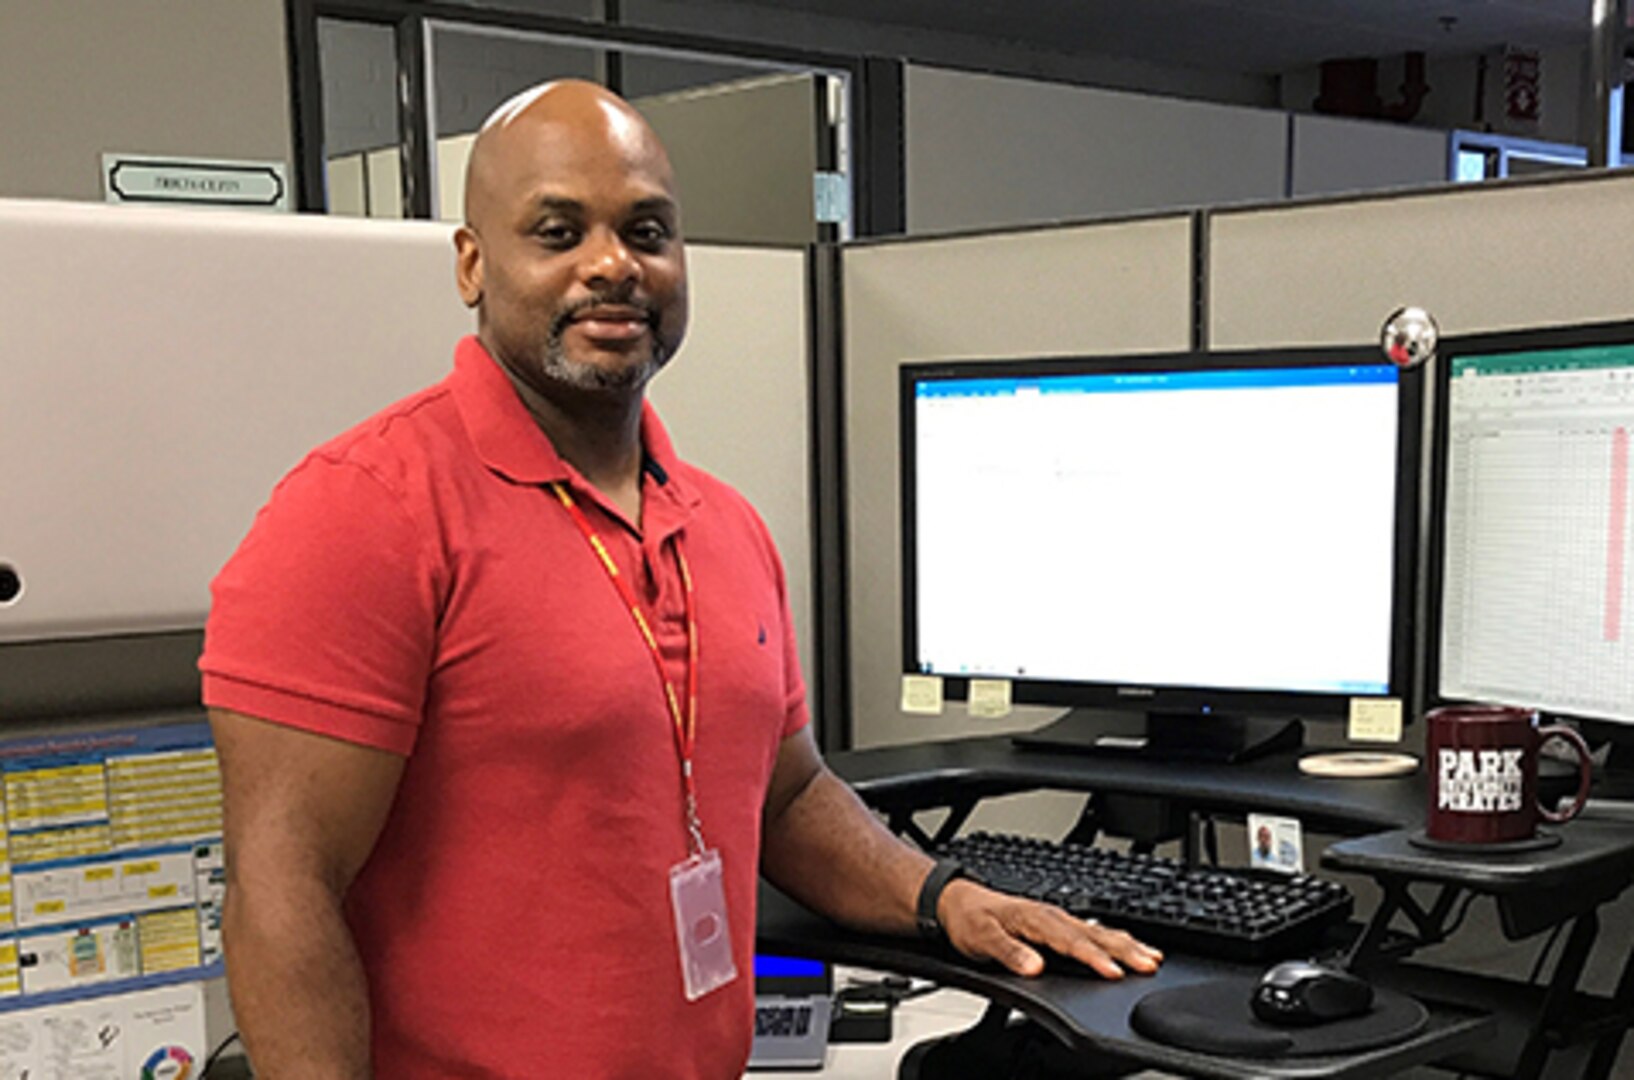 Defense Logistics Agency Aviation - Cherry Point employee Oscar Moore, works as a sustainment support specialist in the Customer Support Directorate.